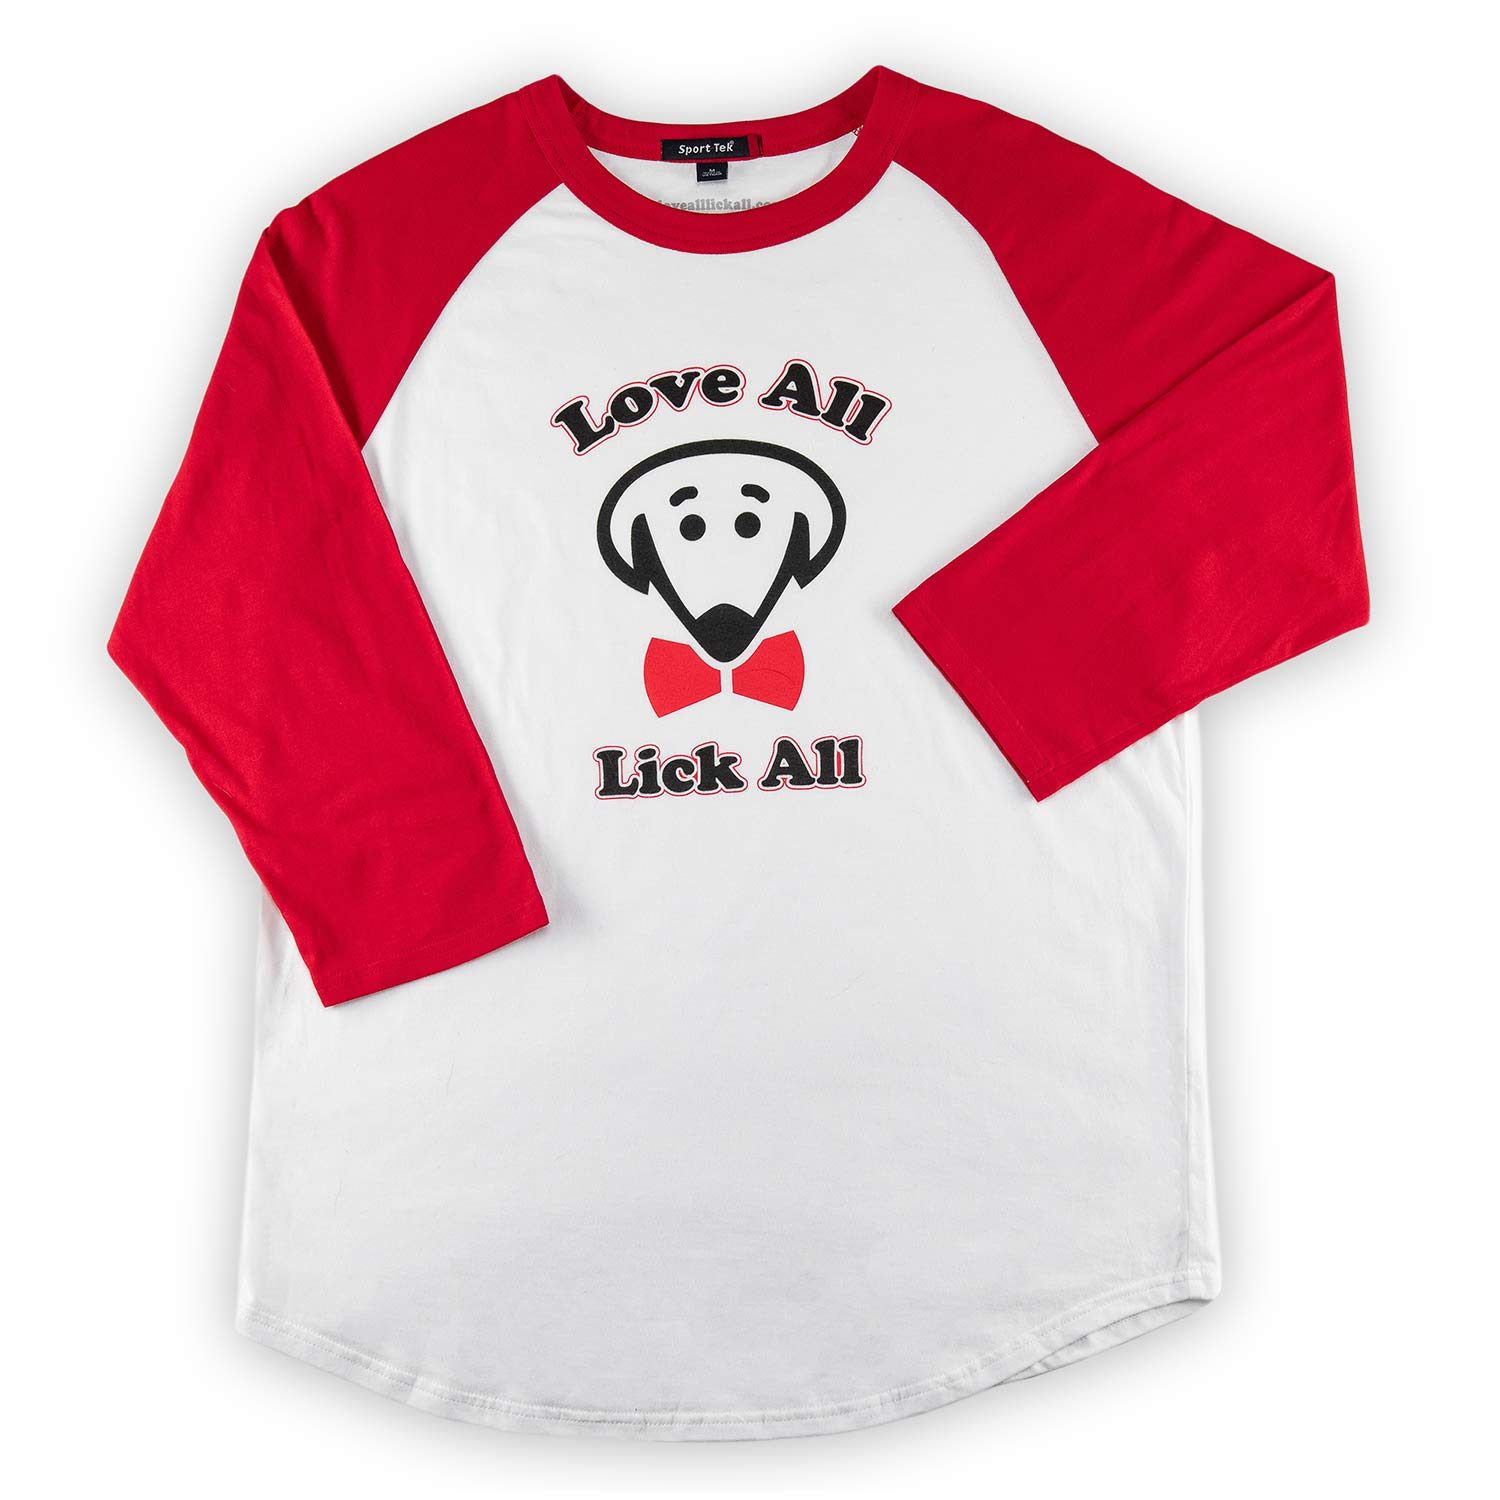 Love All Lick All shirt in white